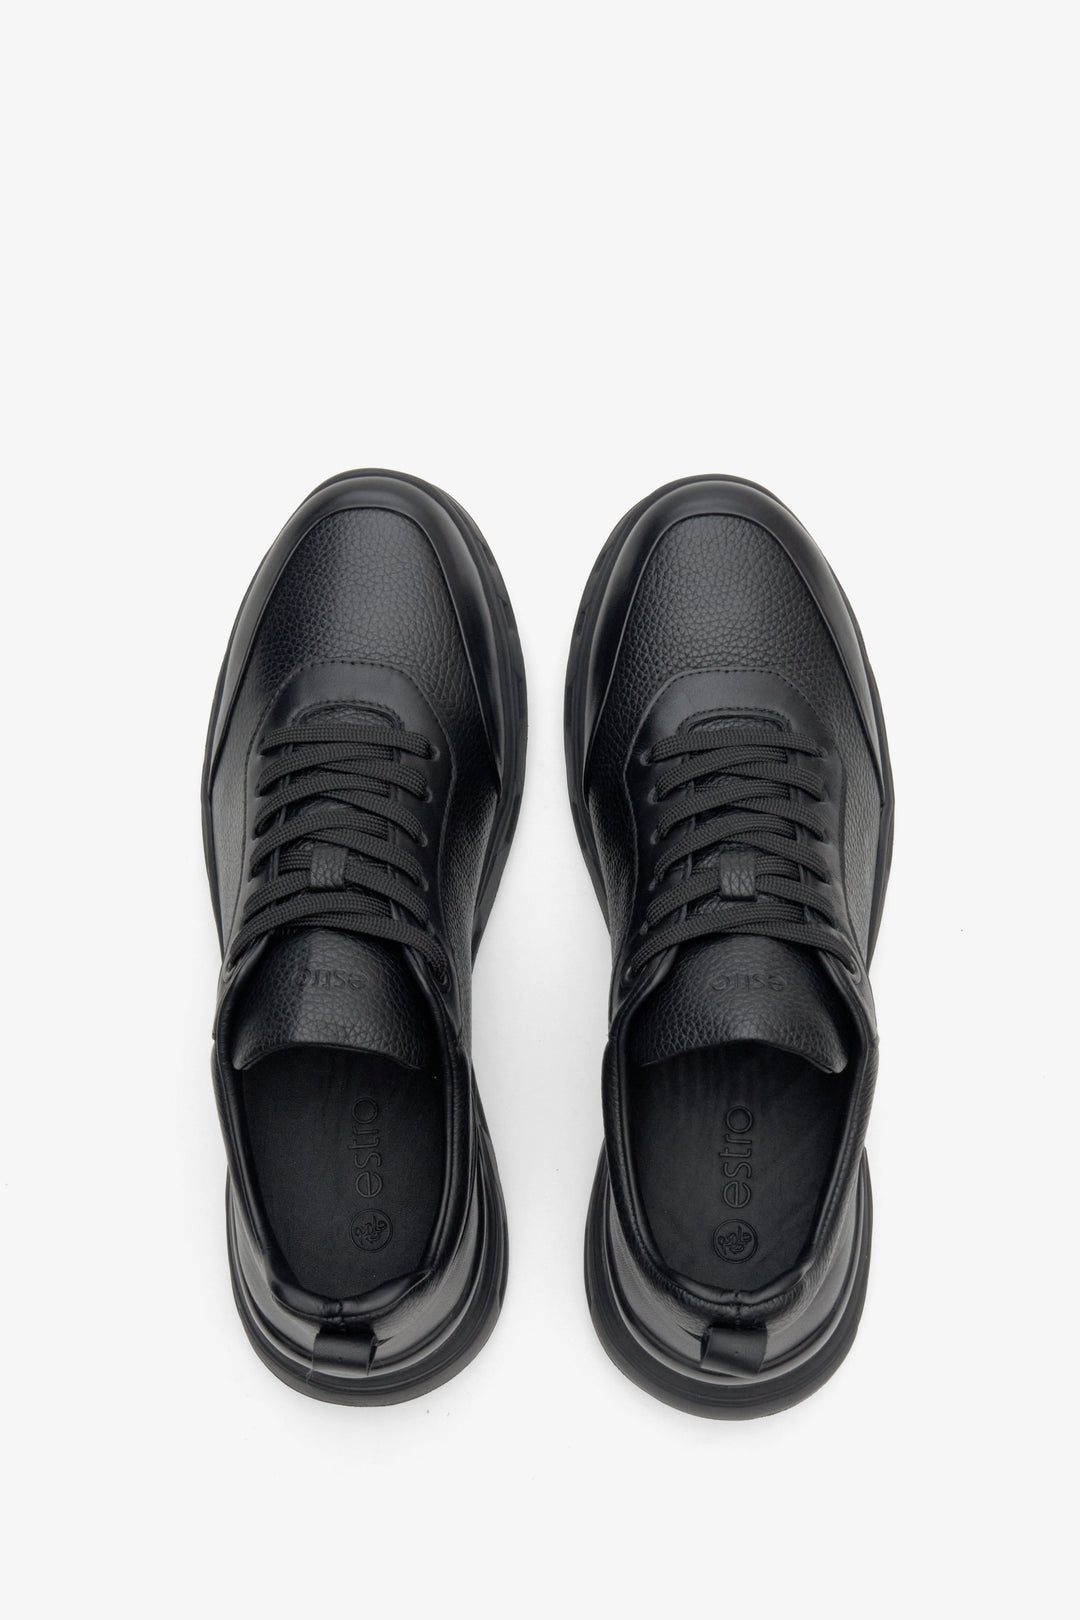 Men's black leather sneakers by Estro - top view presentation of the model.